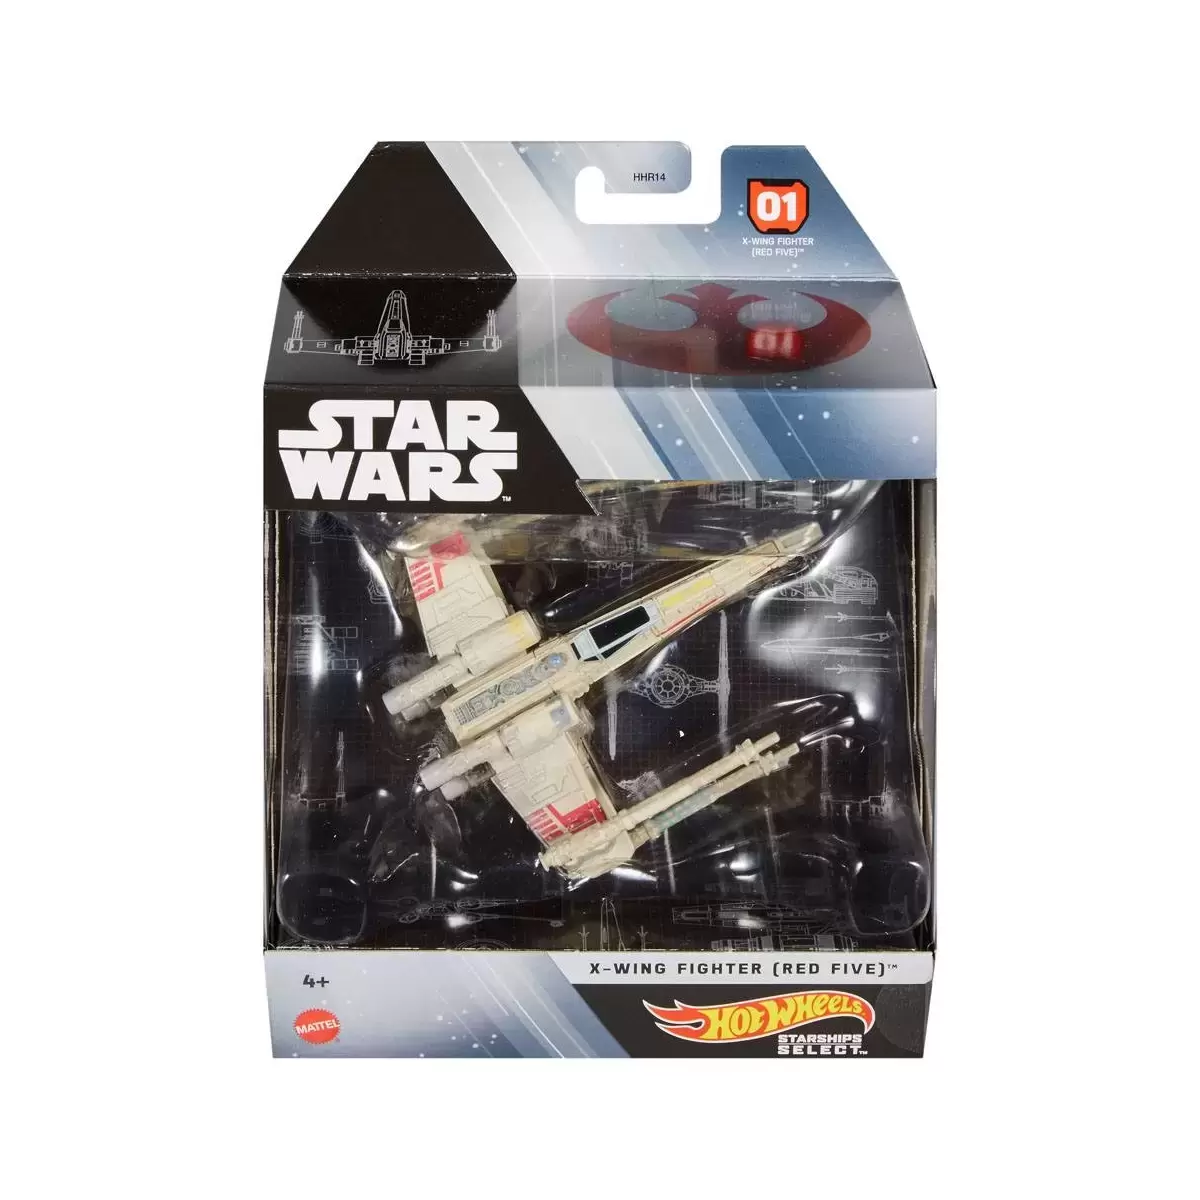 Starships Select - Hot Wheels Star Wars - X- Wing Fighter (Red Five)